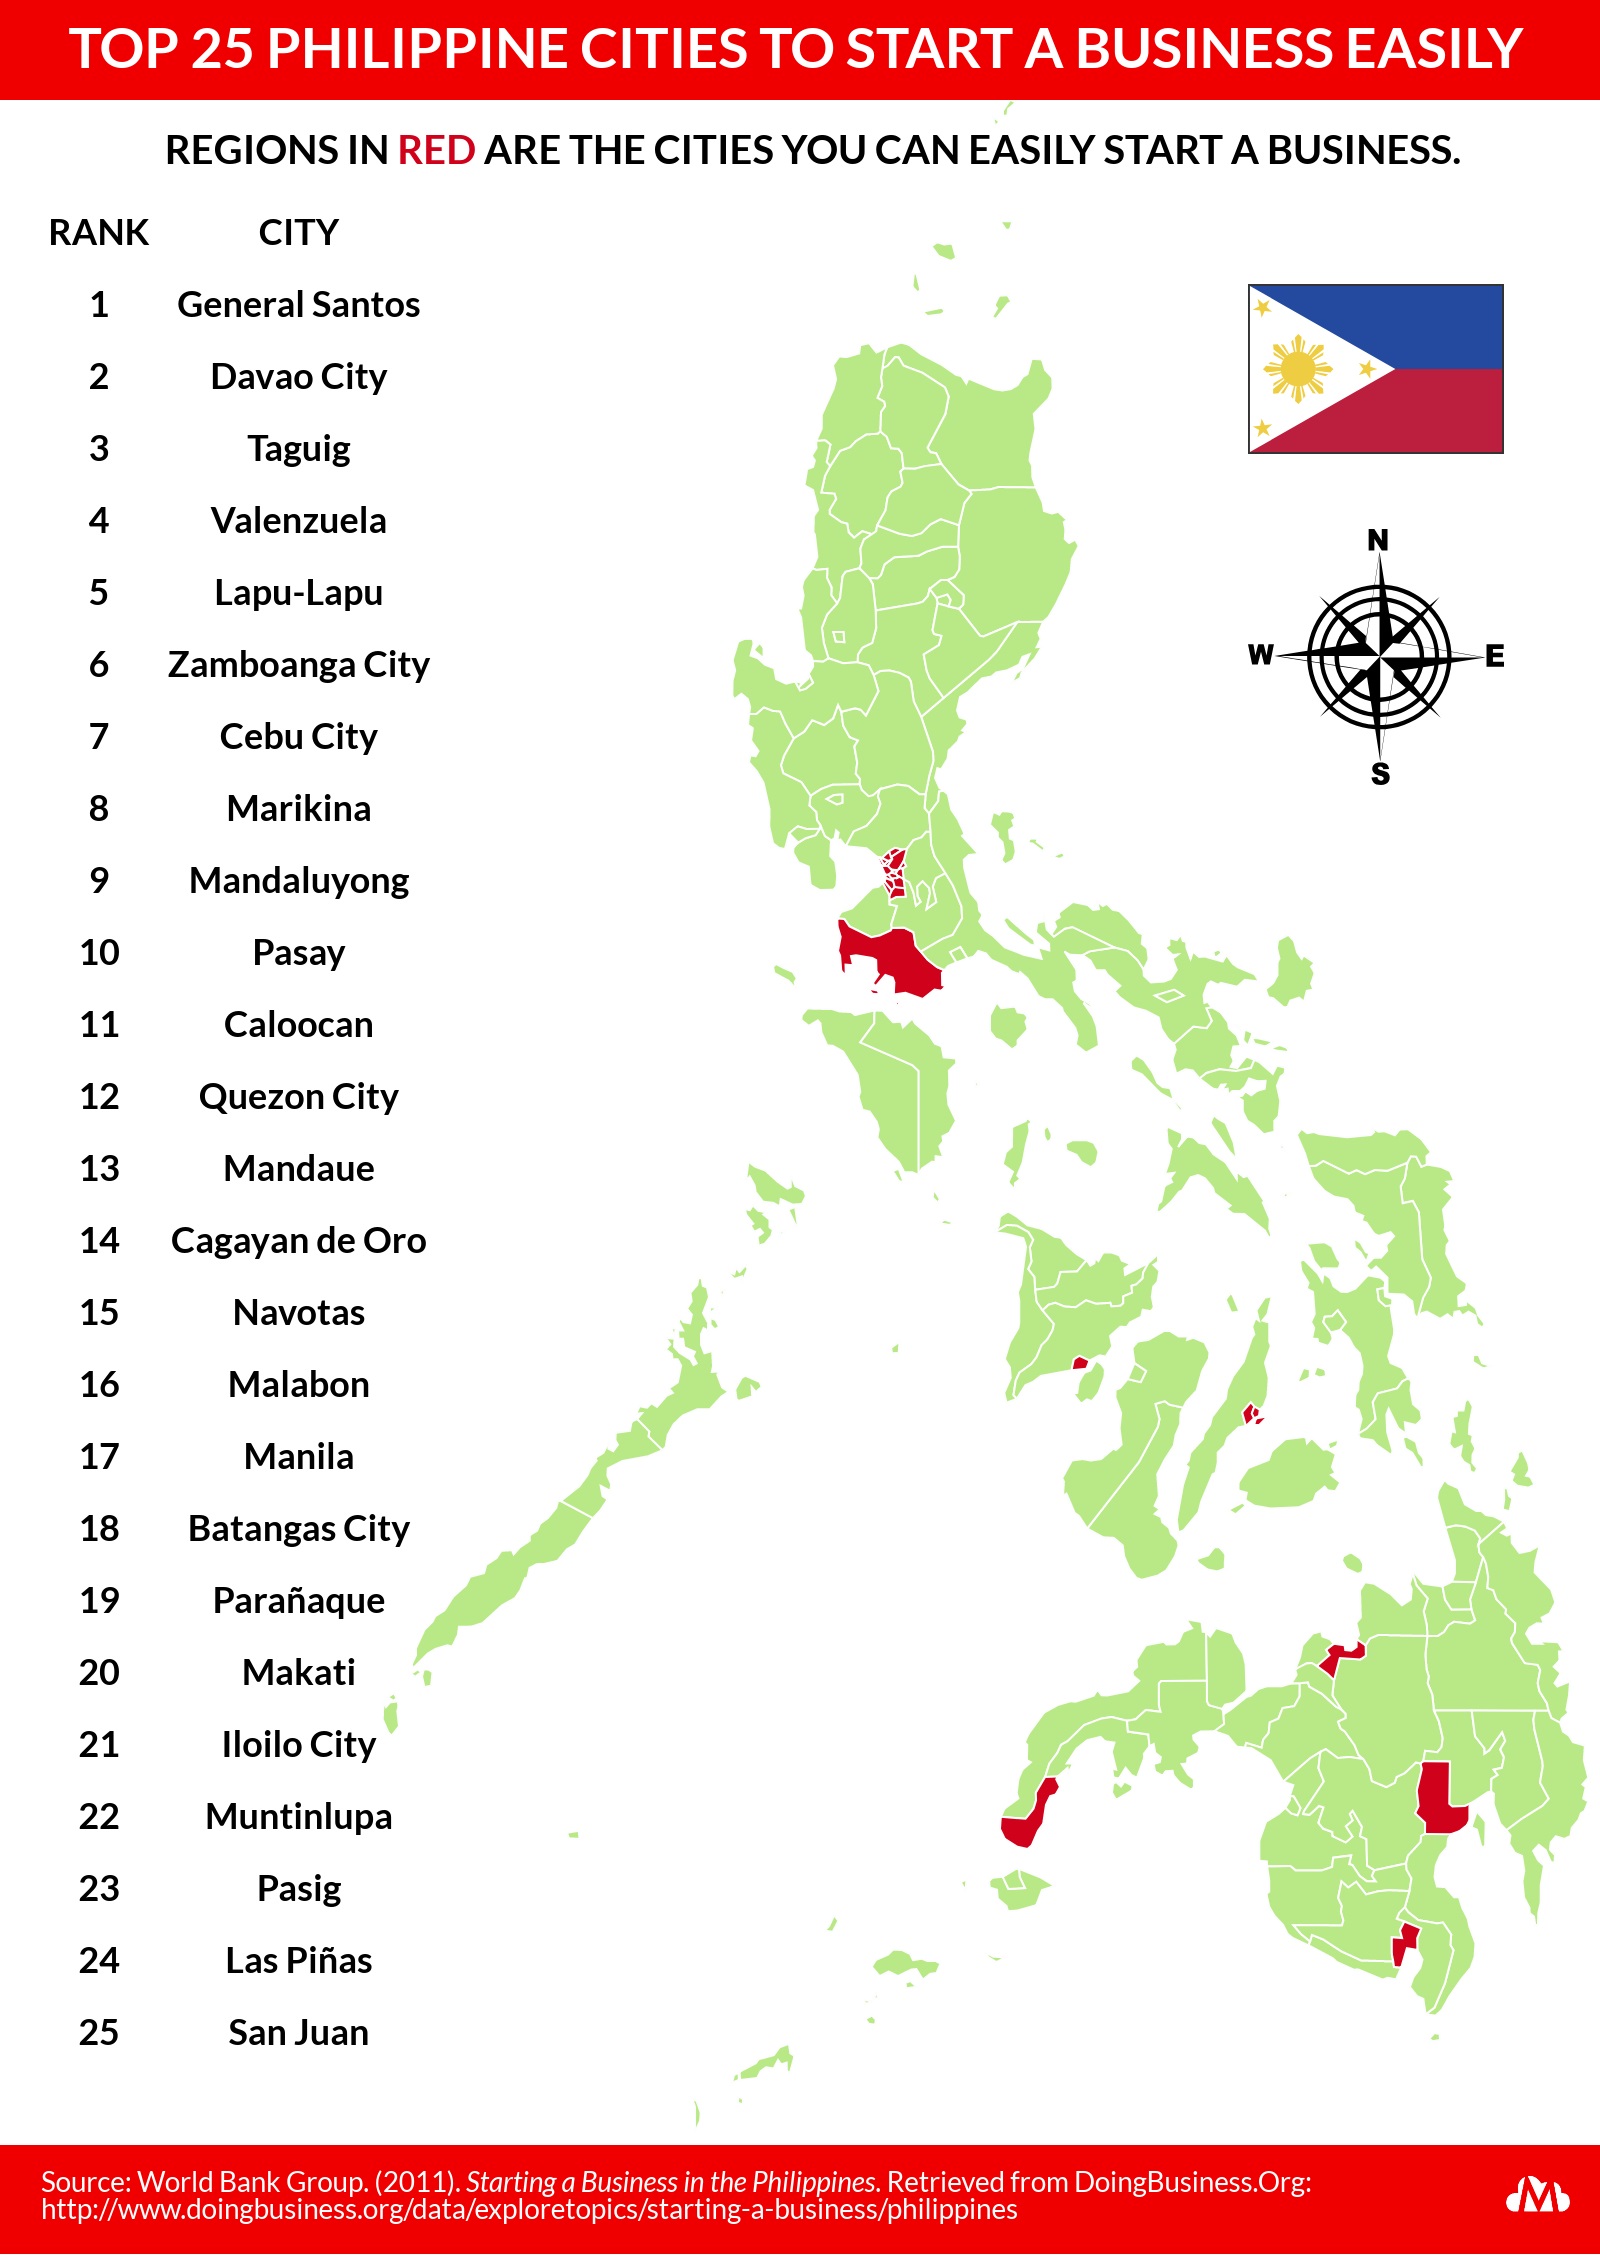 Where In the Philippines Can Foreign Investors Expand their Businesses